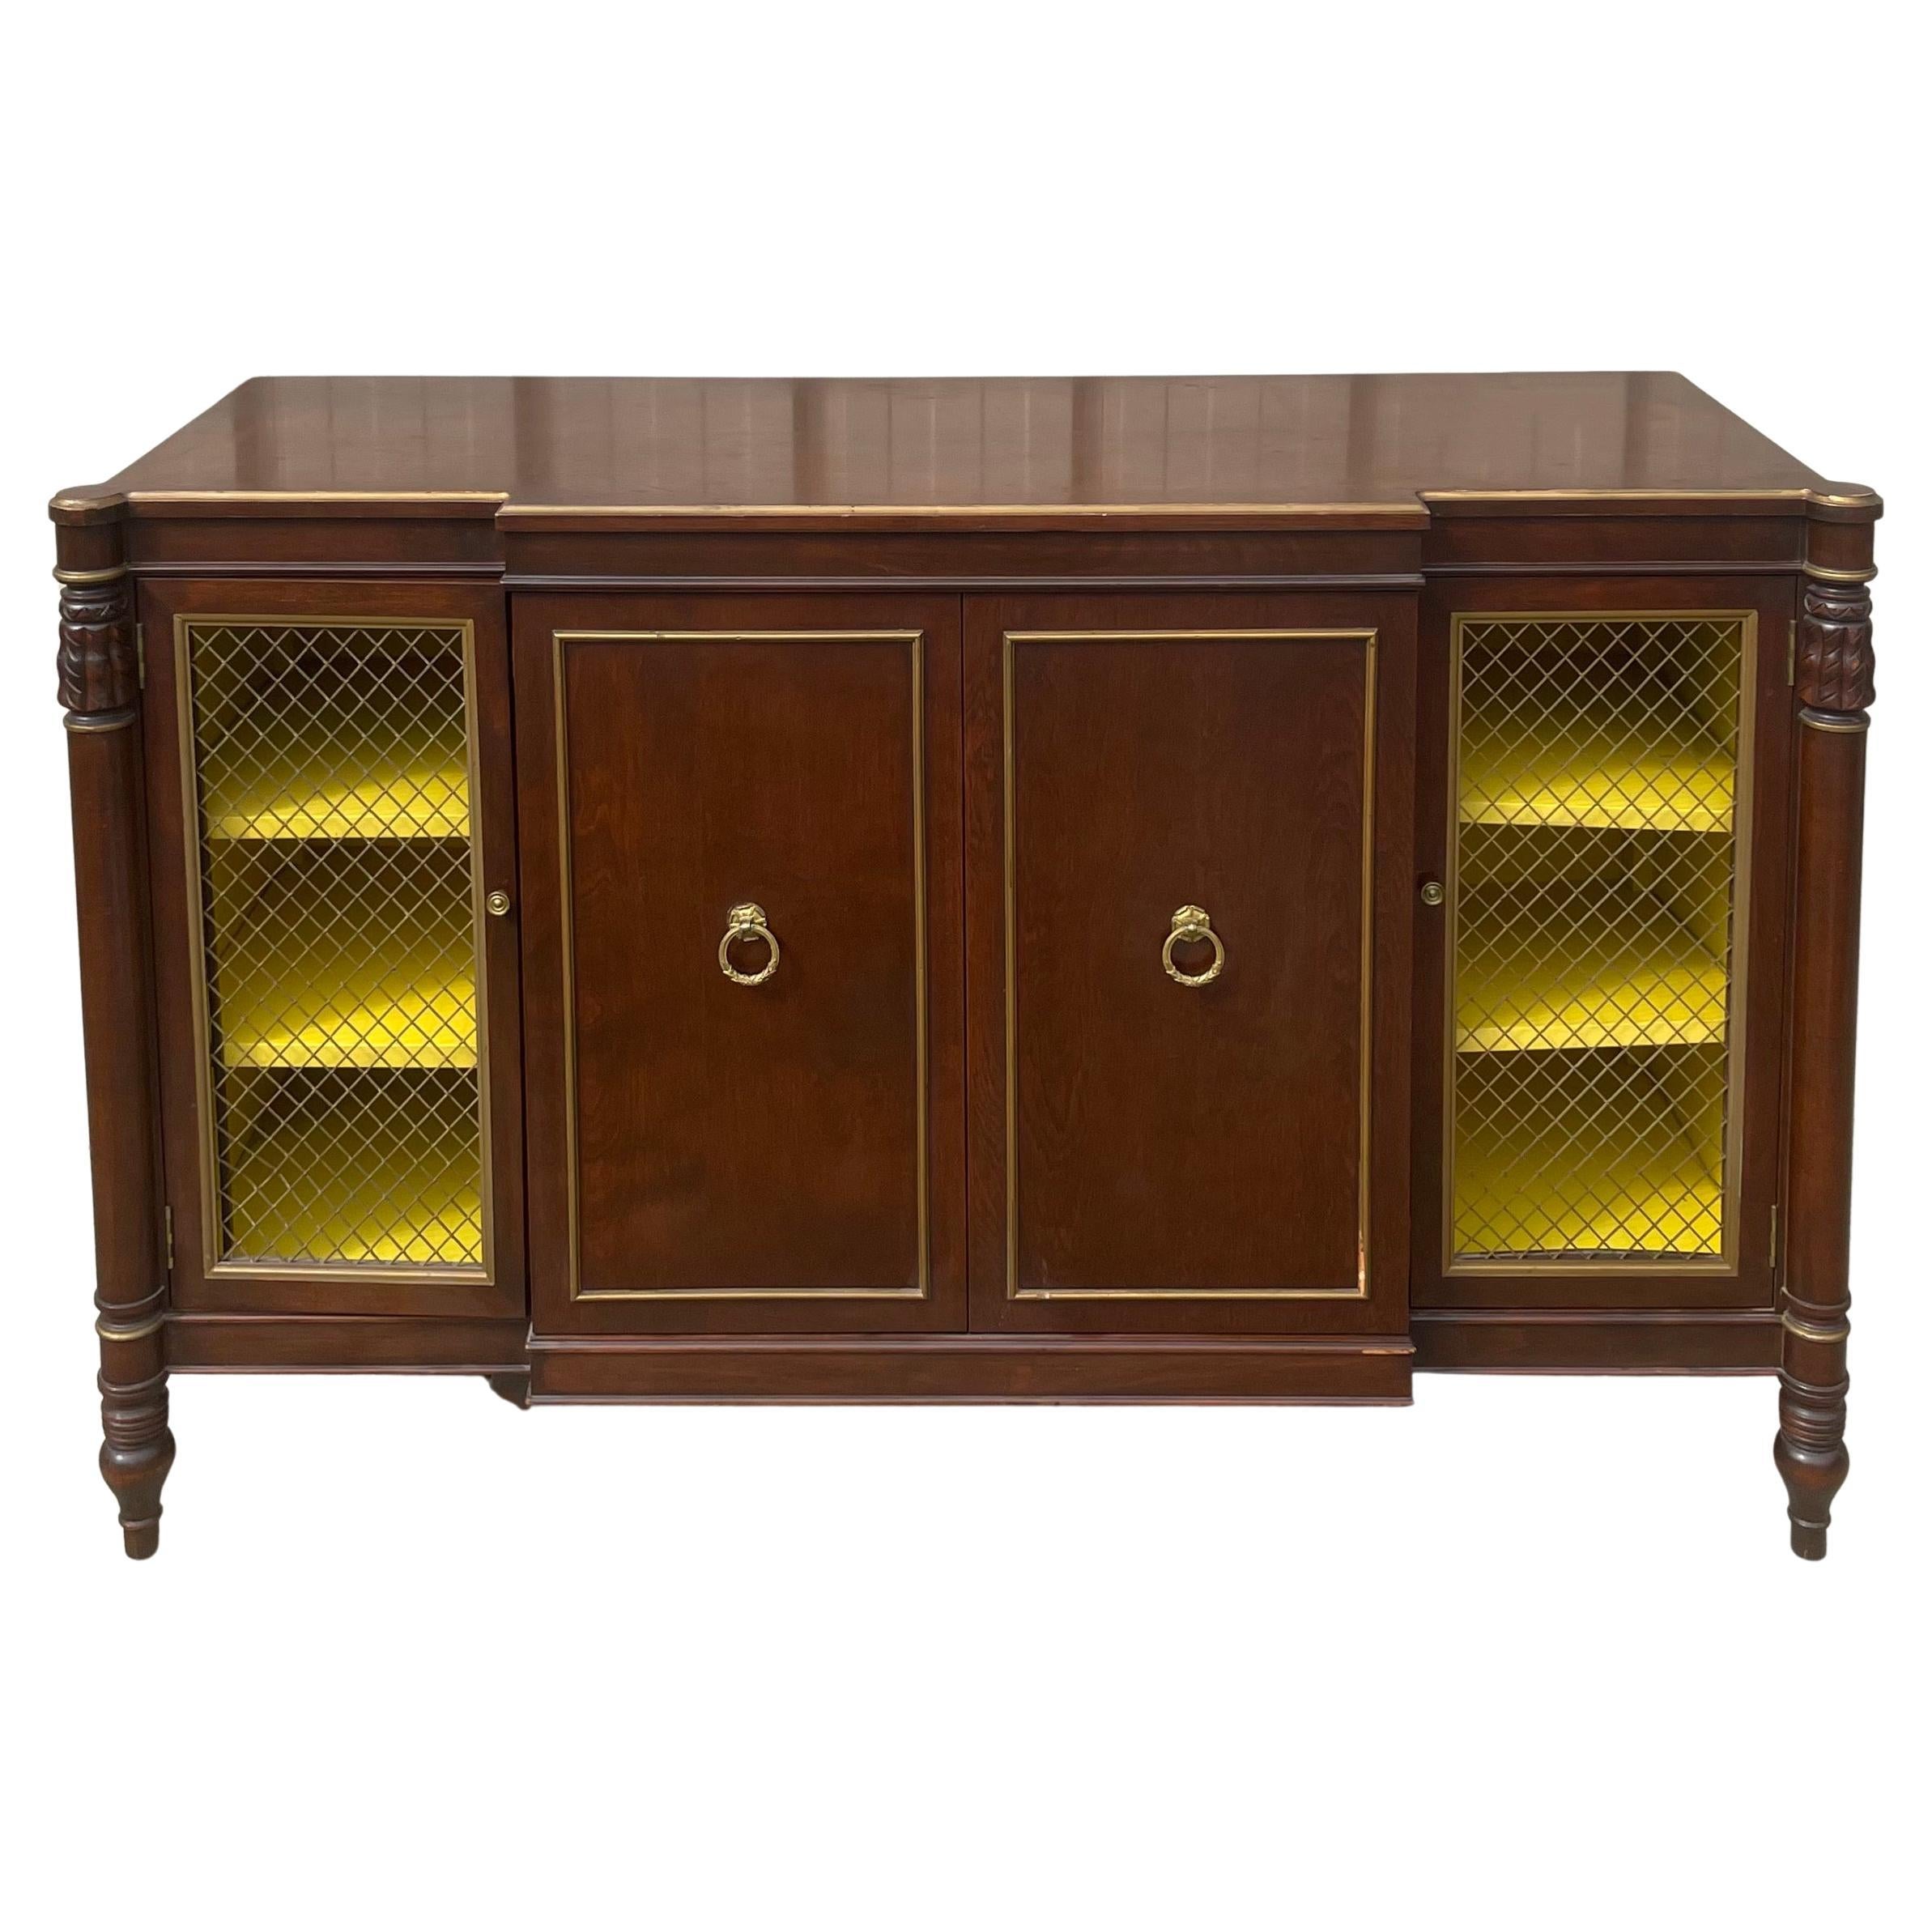 20th-C. Regency Style Mahogany And Yellow Server / Cabinet / Server